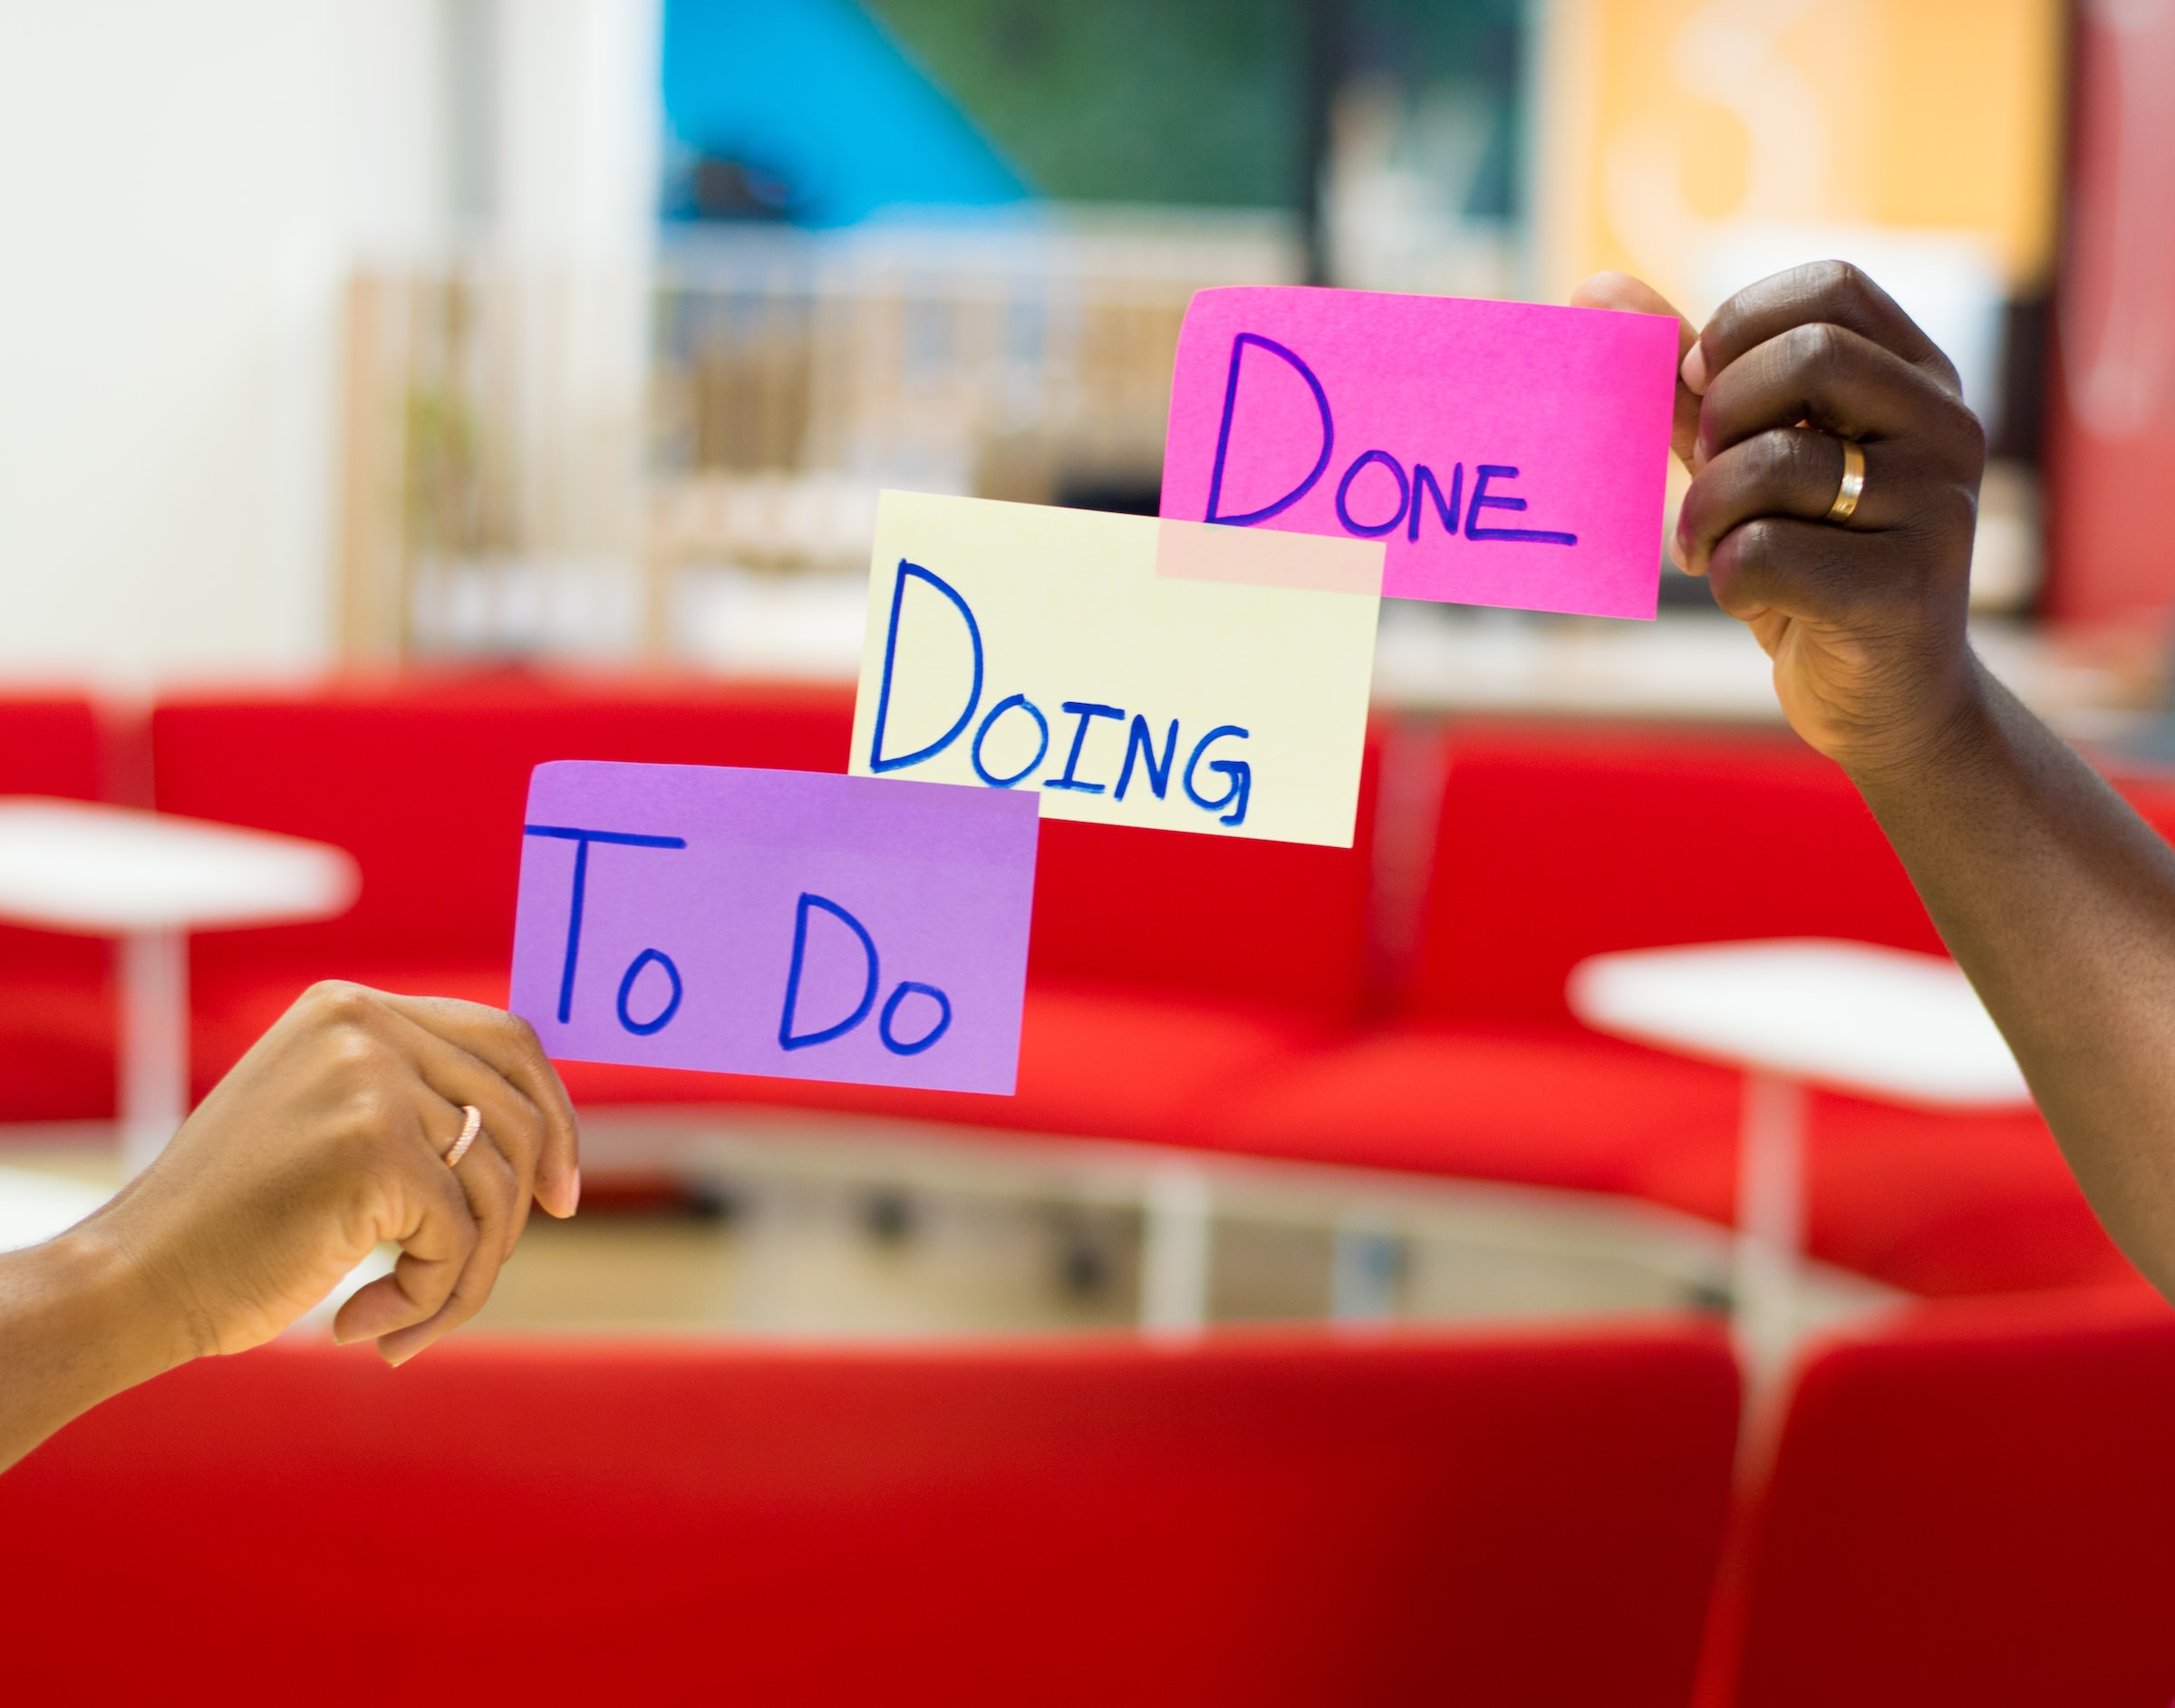 There are two people showing three sheets of paper. On these sheets are written “to do”, “doing”, “done”.